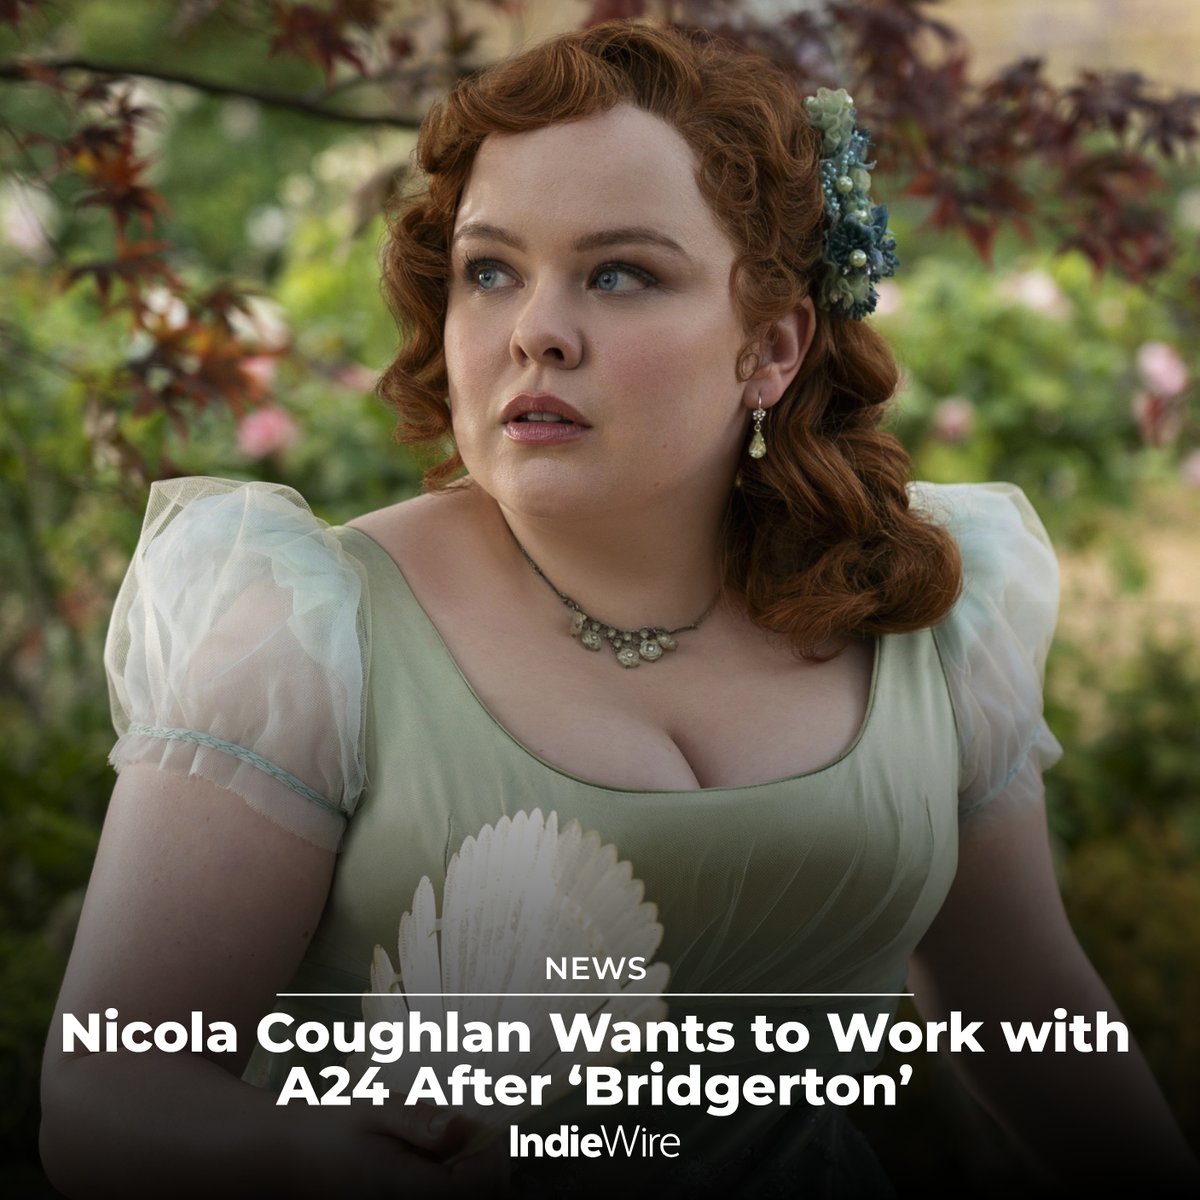 Nicola Coughlan is nowhere near done with #Bridgerton, but the star of Season 3 can’t help looking down the road. From hosting #SNL to working with A24, she's diving into her wishlist: trib.al/X1FTqPA